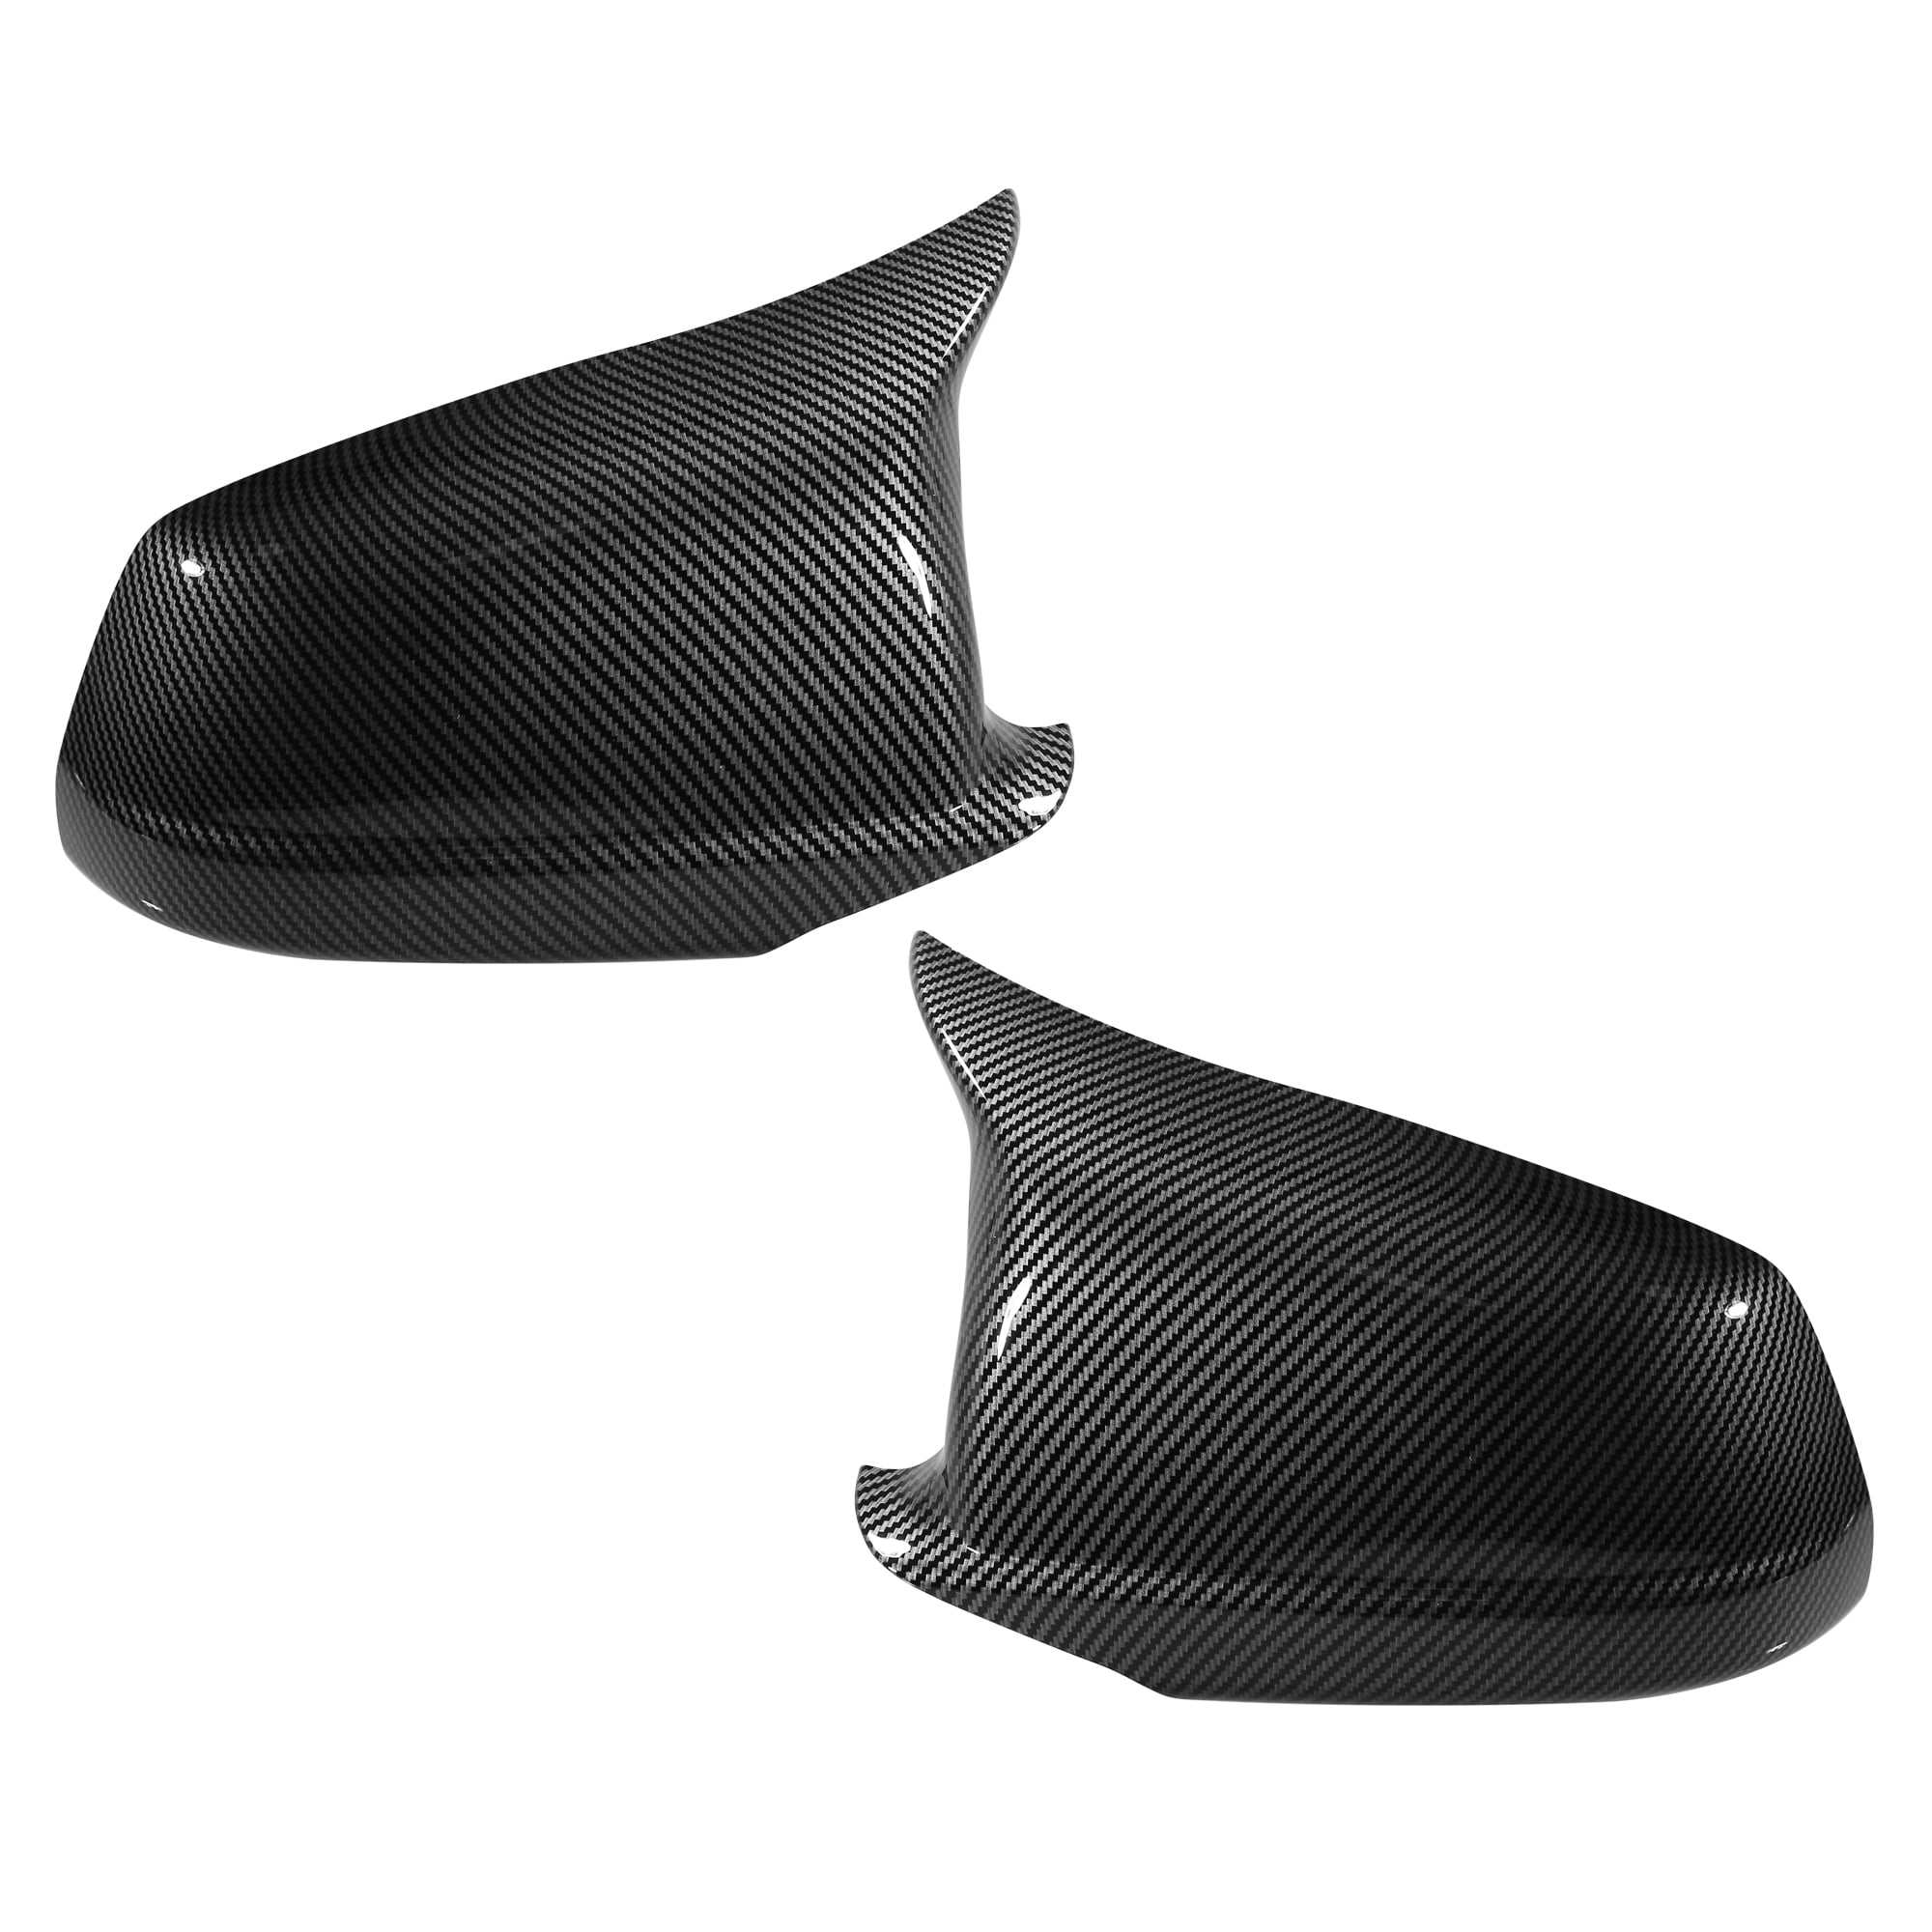 Pair Car Exterior Rear View Mirror Covers Cap Replacement for BMW F10 F11  F18 528i 530i 2011-2013 Carbon Fiber Pattern